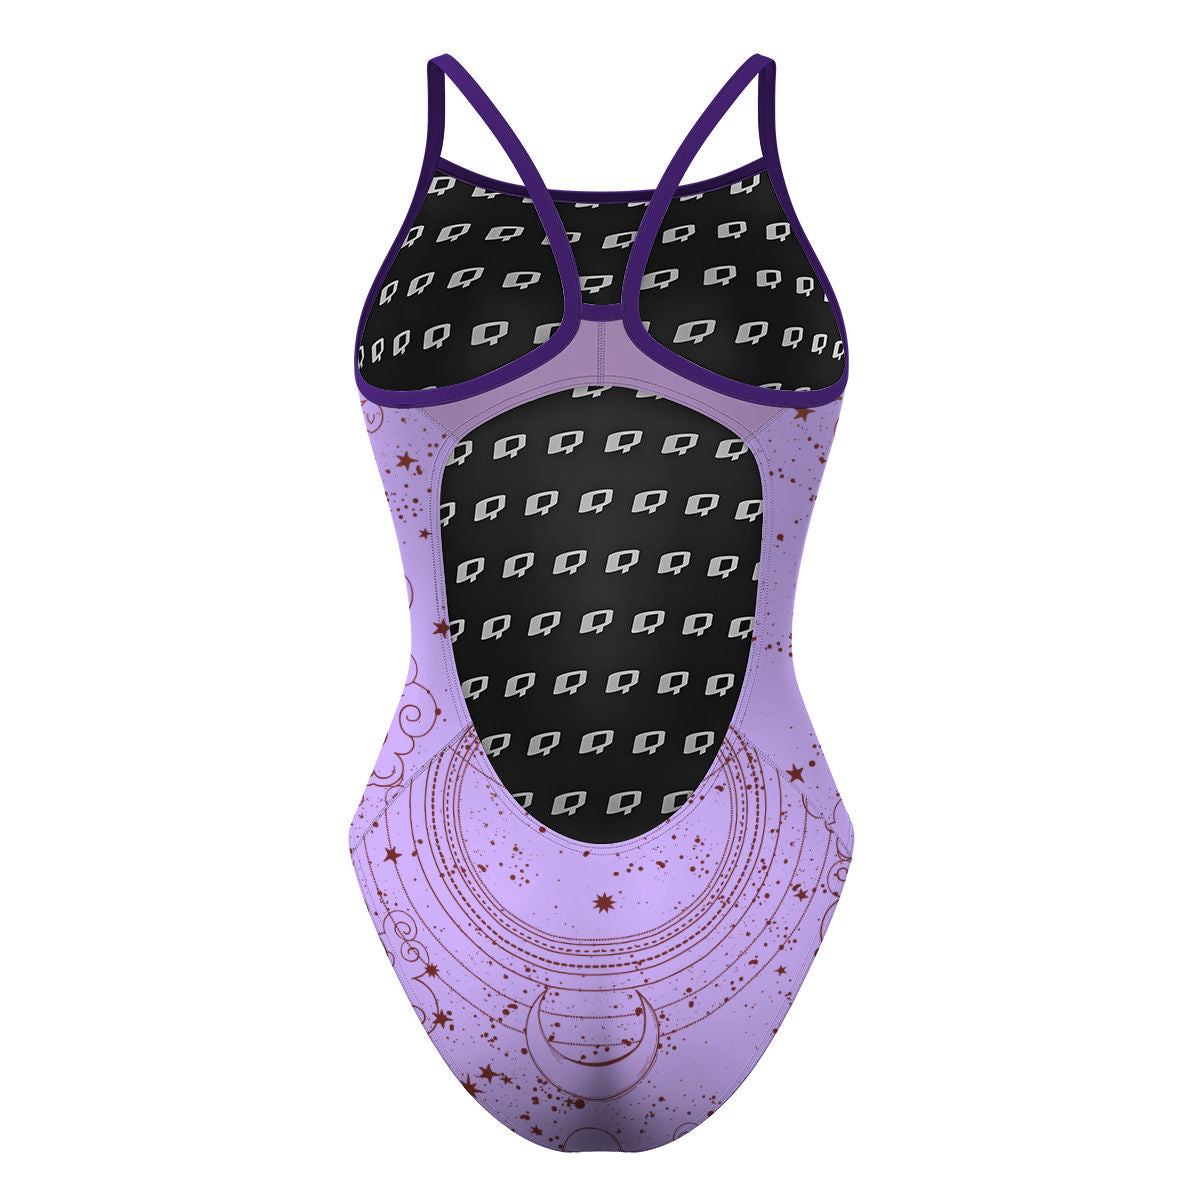 Spread your magic - Skinny Strap Swimsuit